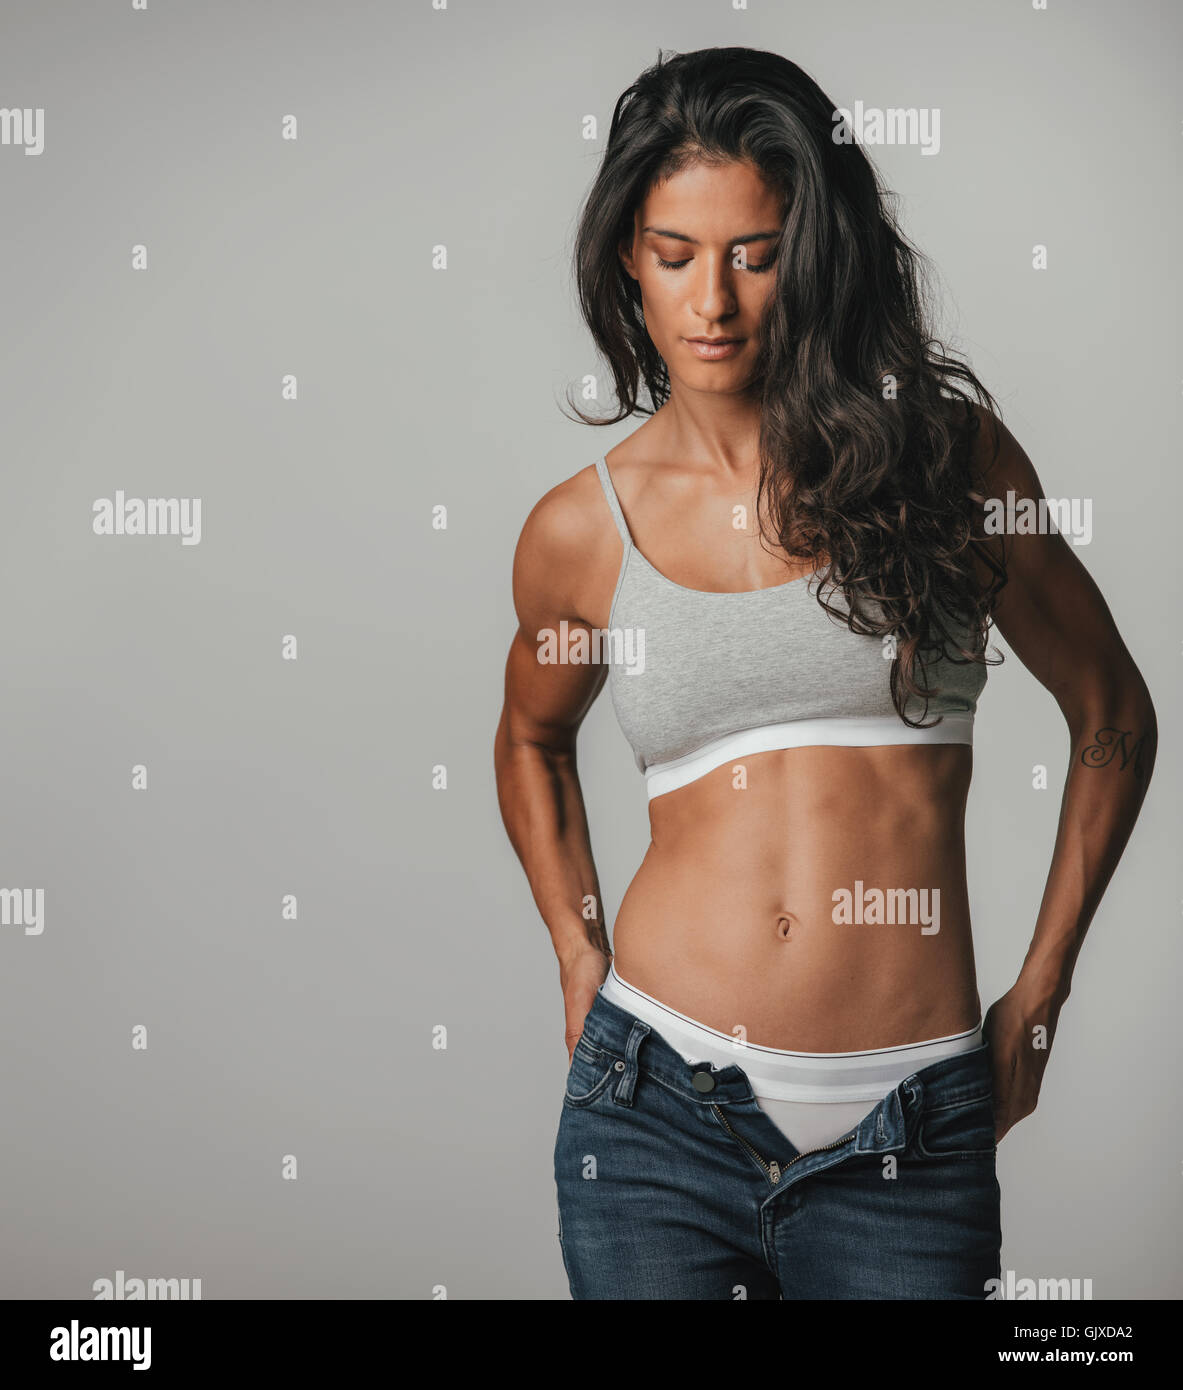 Fit young woman pulling down pants with copy space to her side over gray background Stock Photo